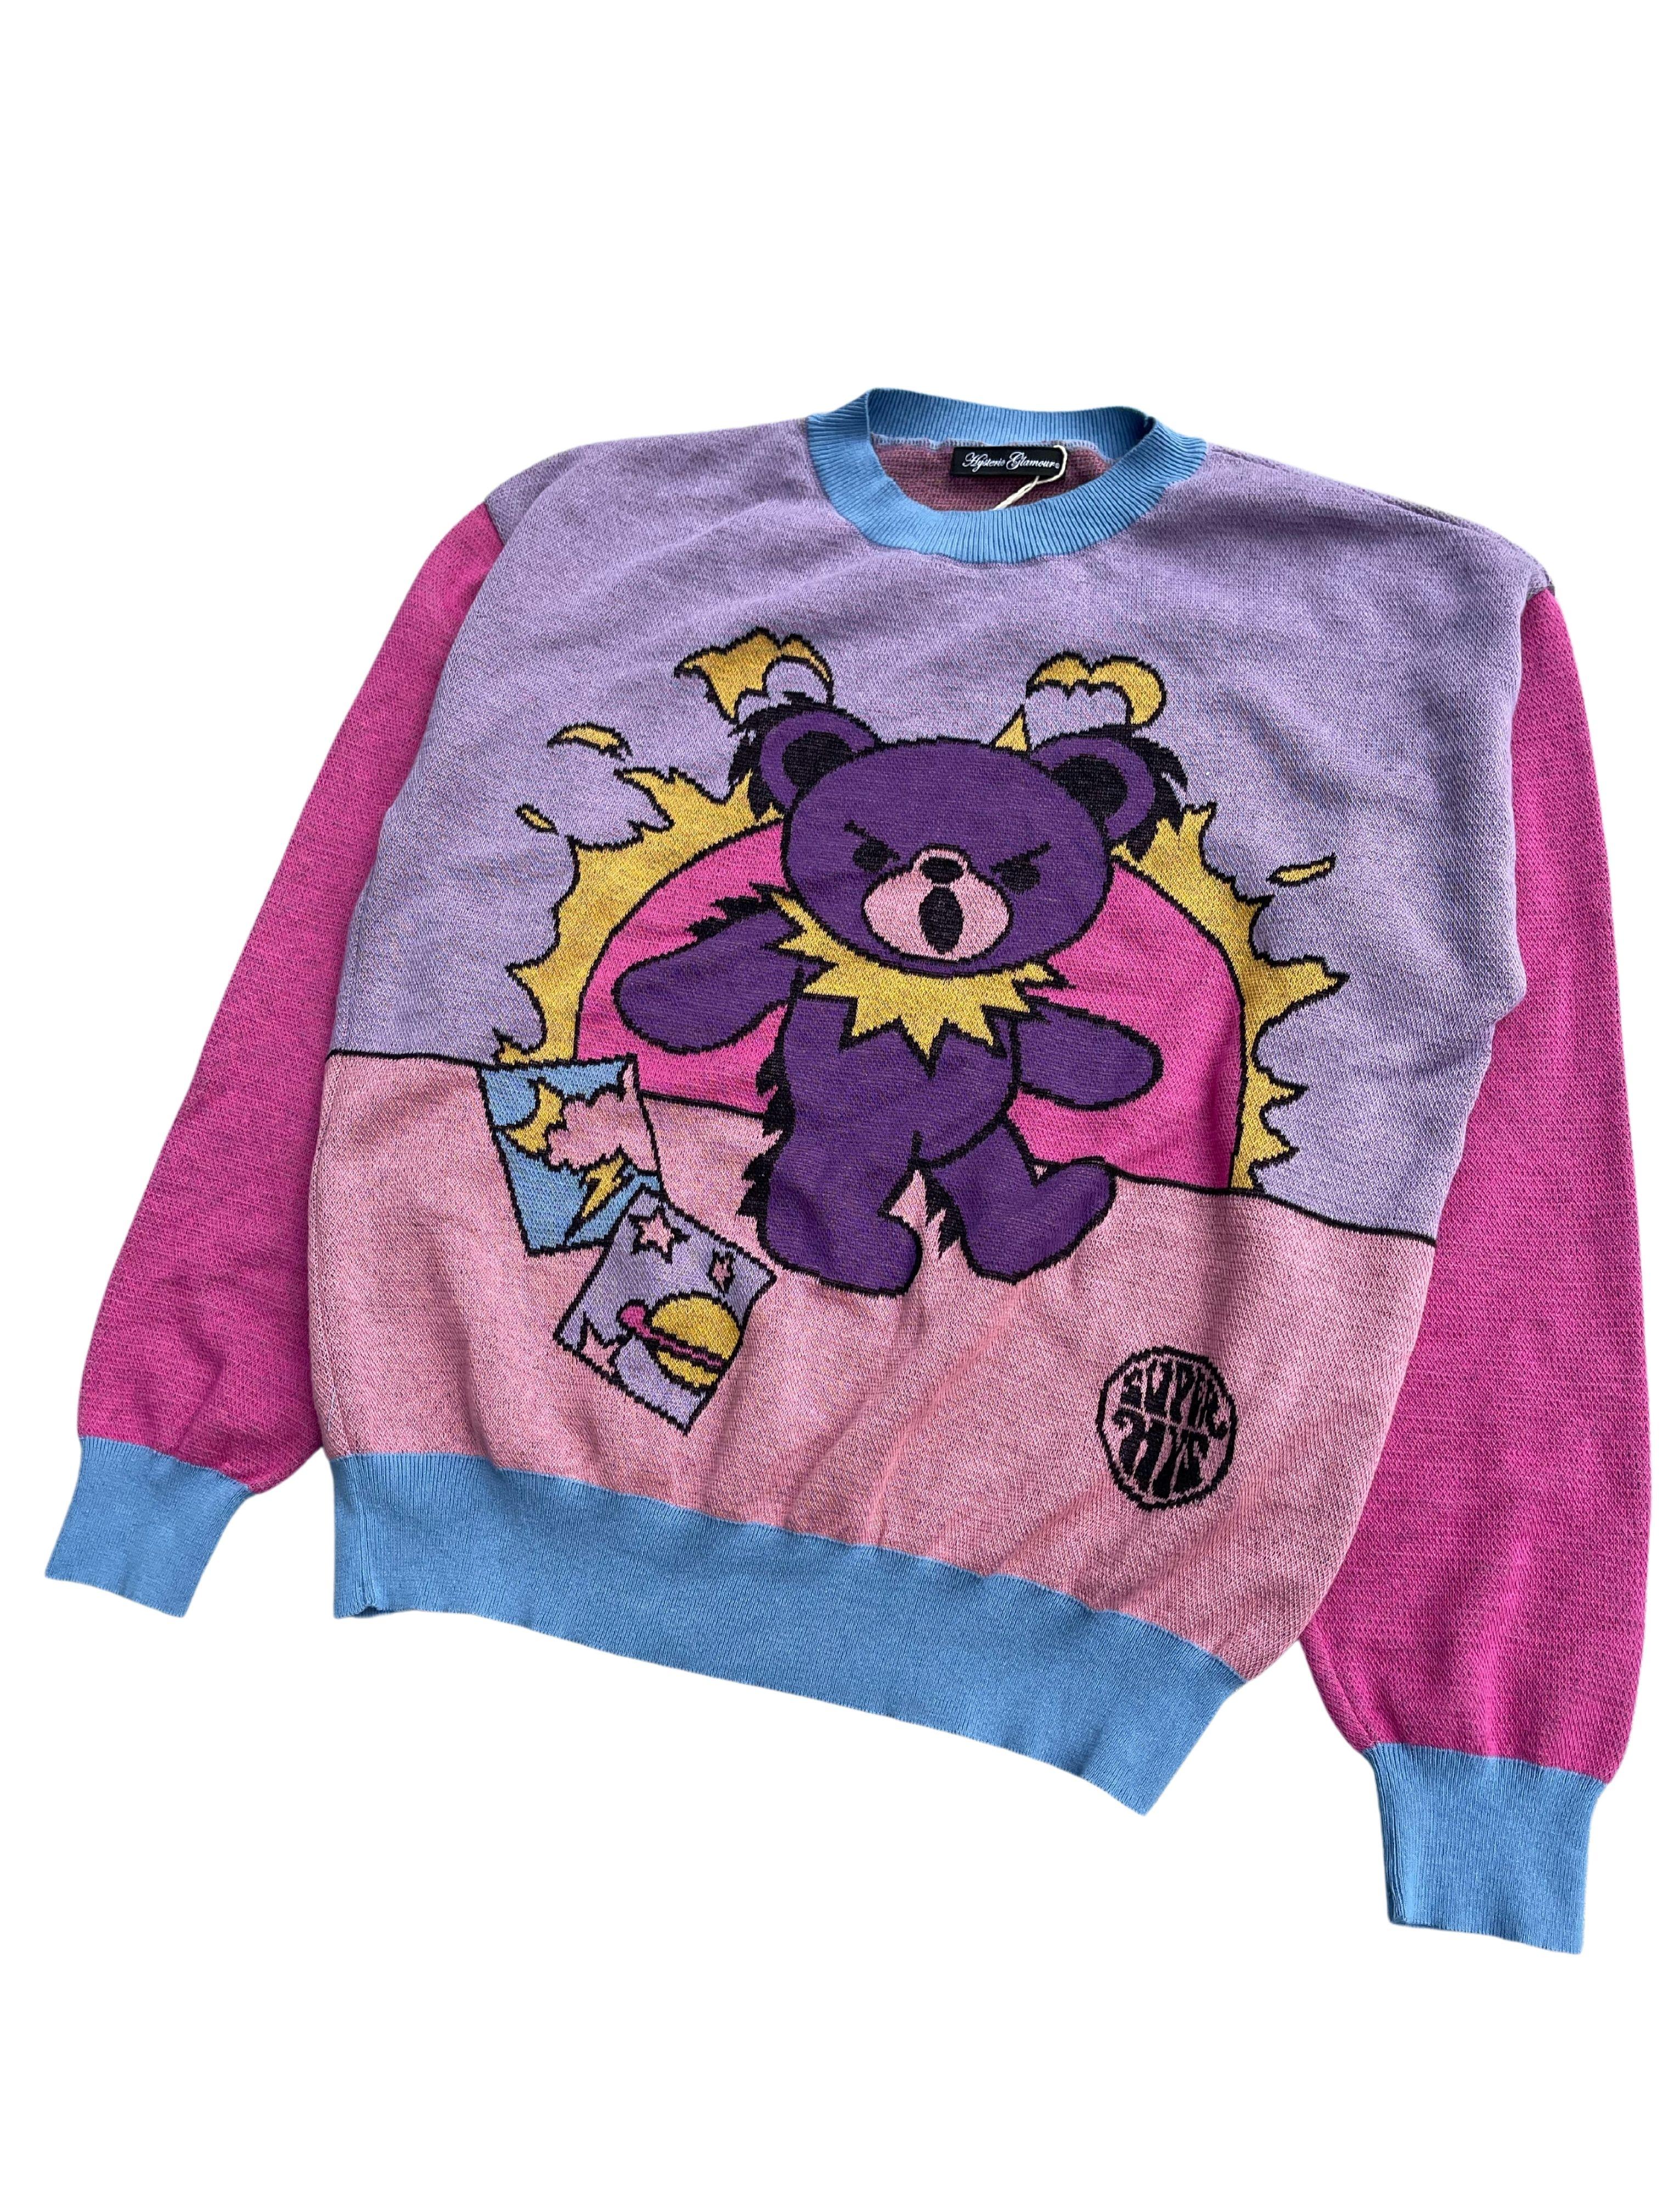 Hysteric Glamour Mad Teddy Sweater, Spring Summer 2020 In New Condition In Tương Mai Ward, Hoang Mai District